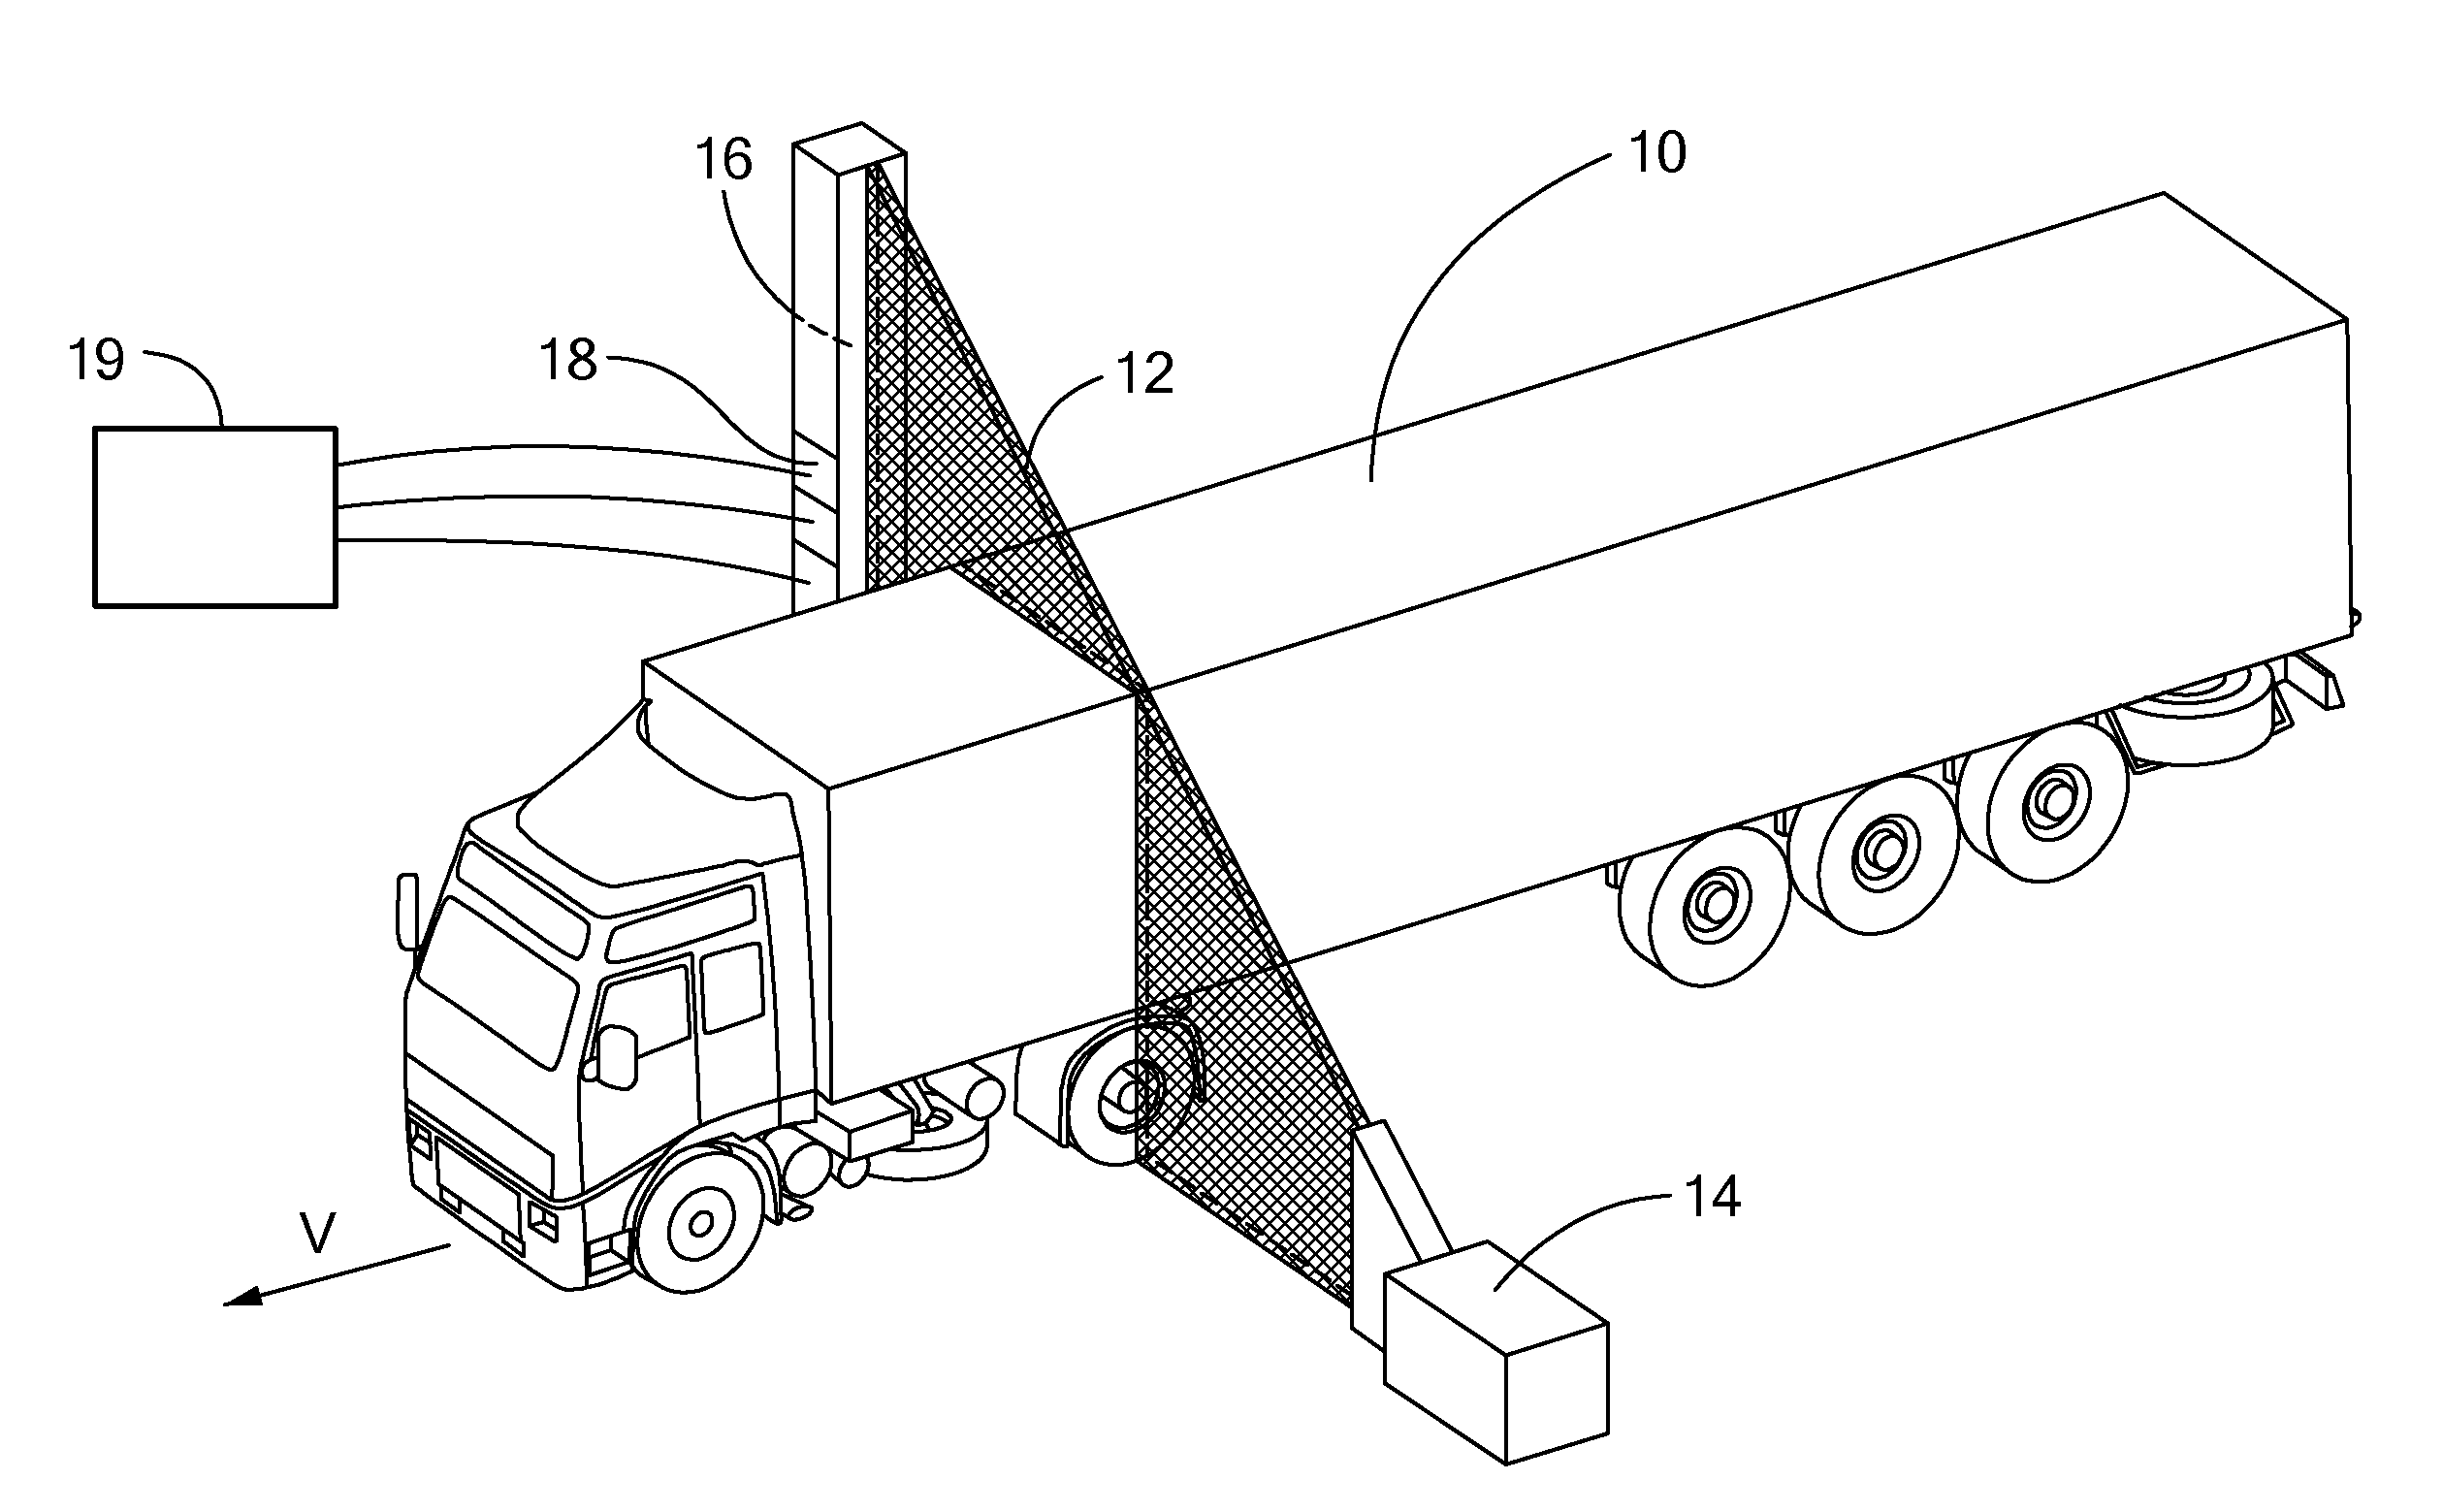 System and Methods for Intrapulse Multi-energy and Adaptive Multi-energy X-ray Cargo Inspection